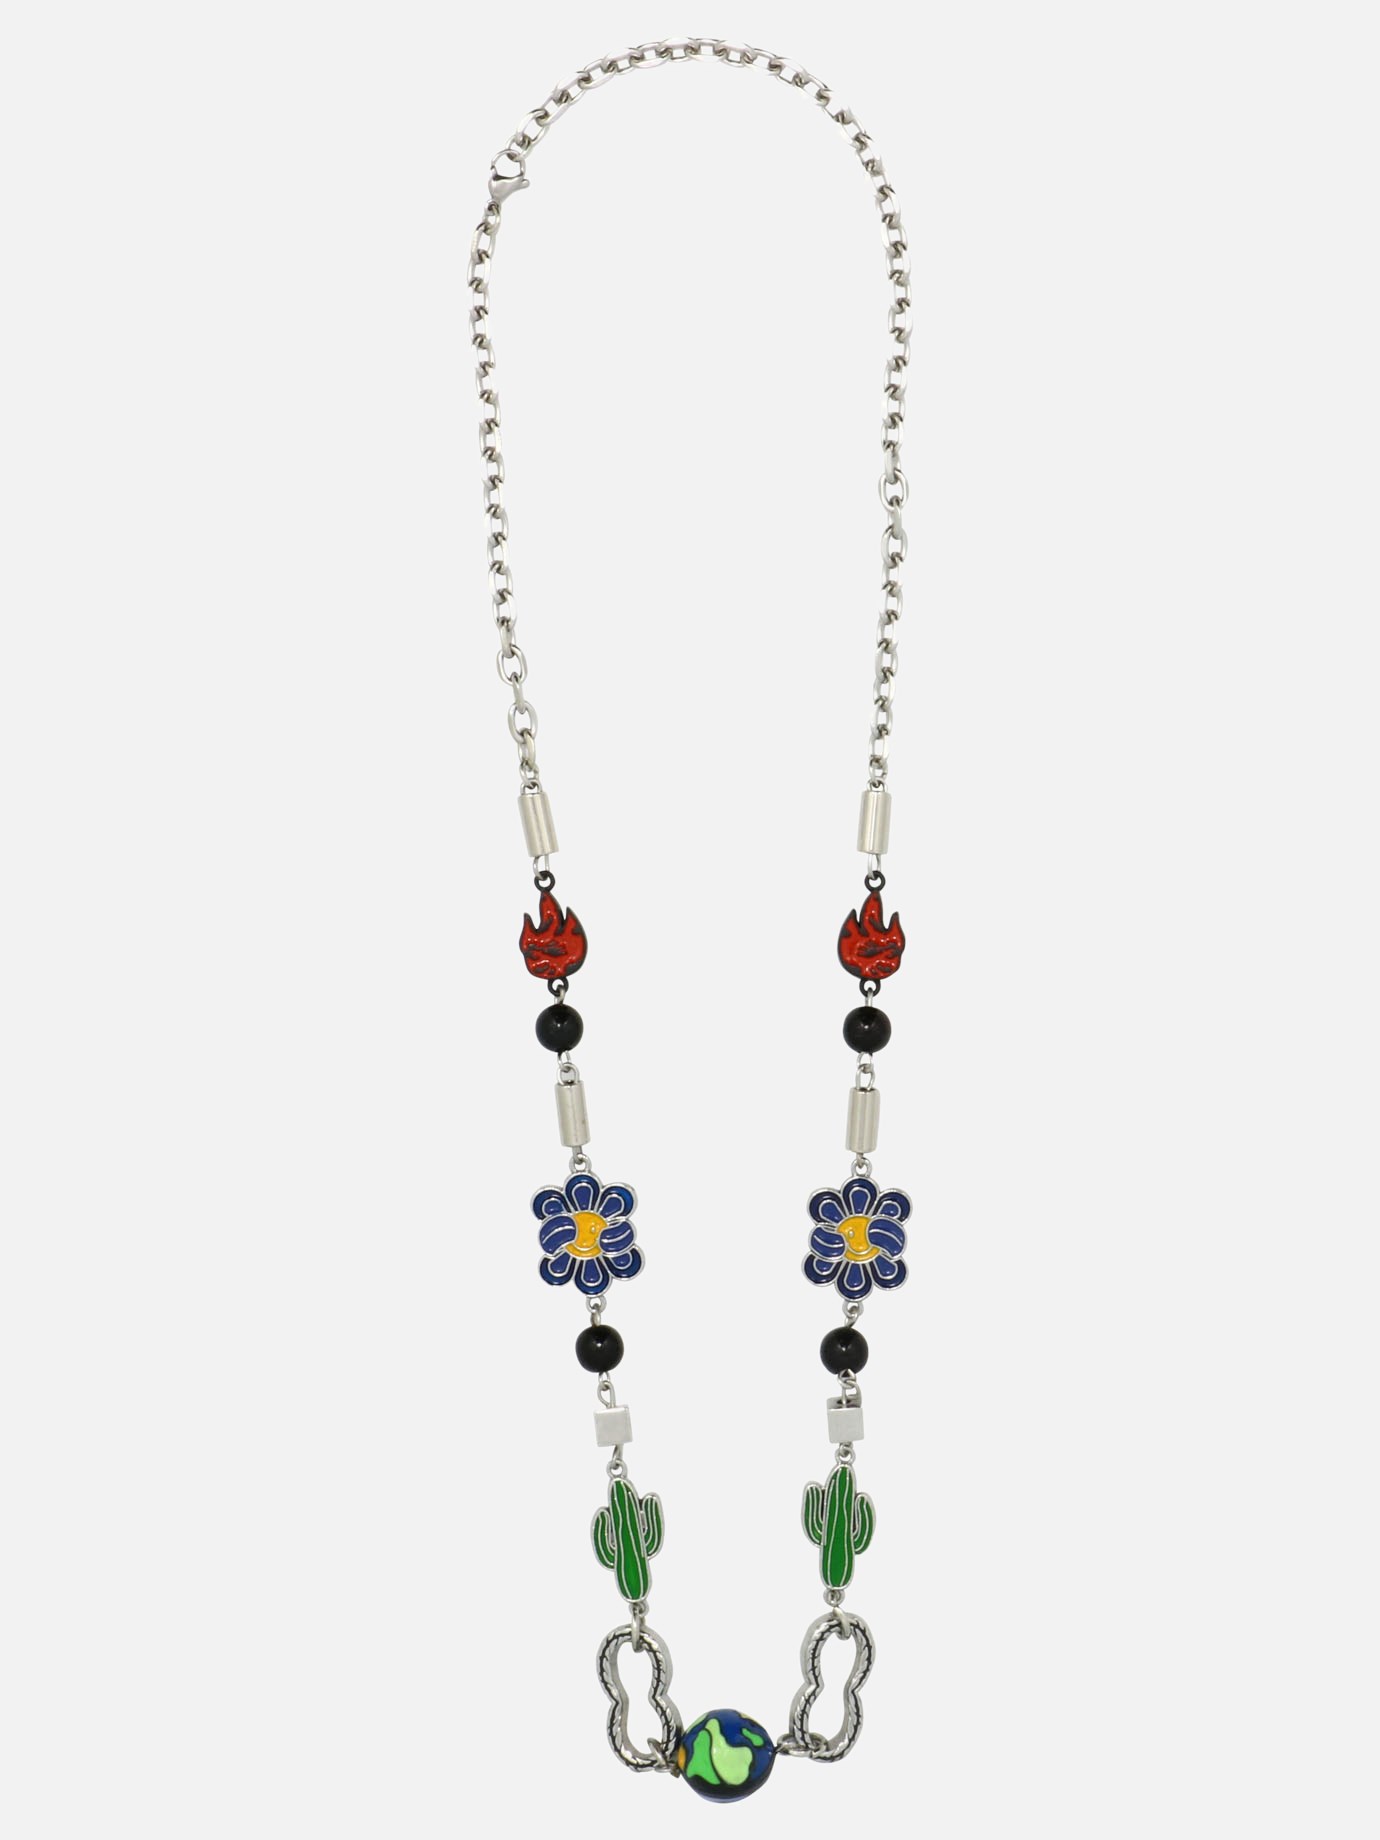  Catctus Flower Flame  necklace by SALUTE / EVAE +